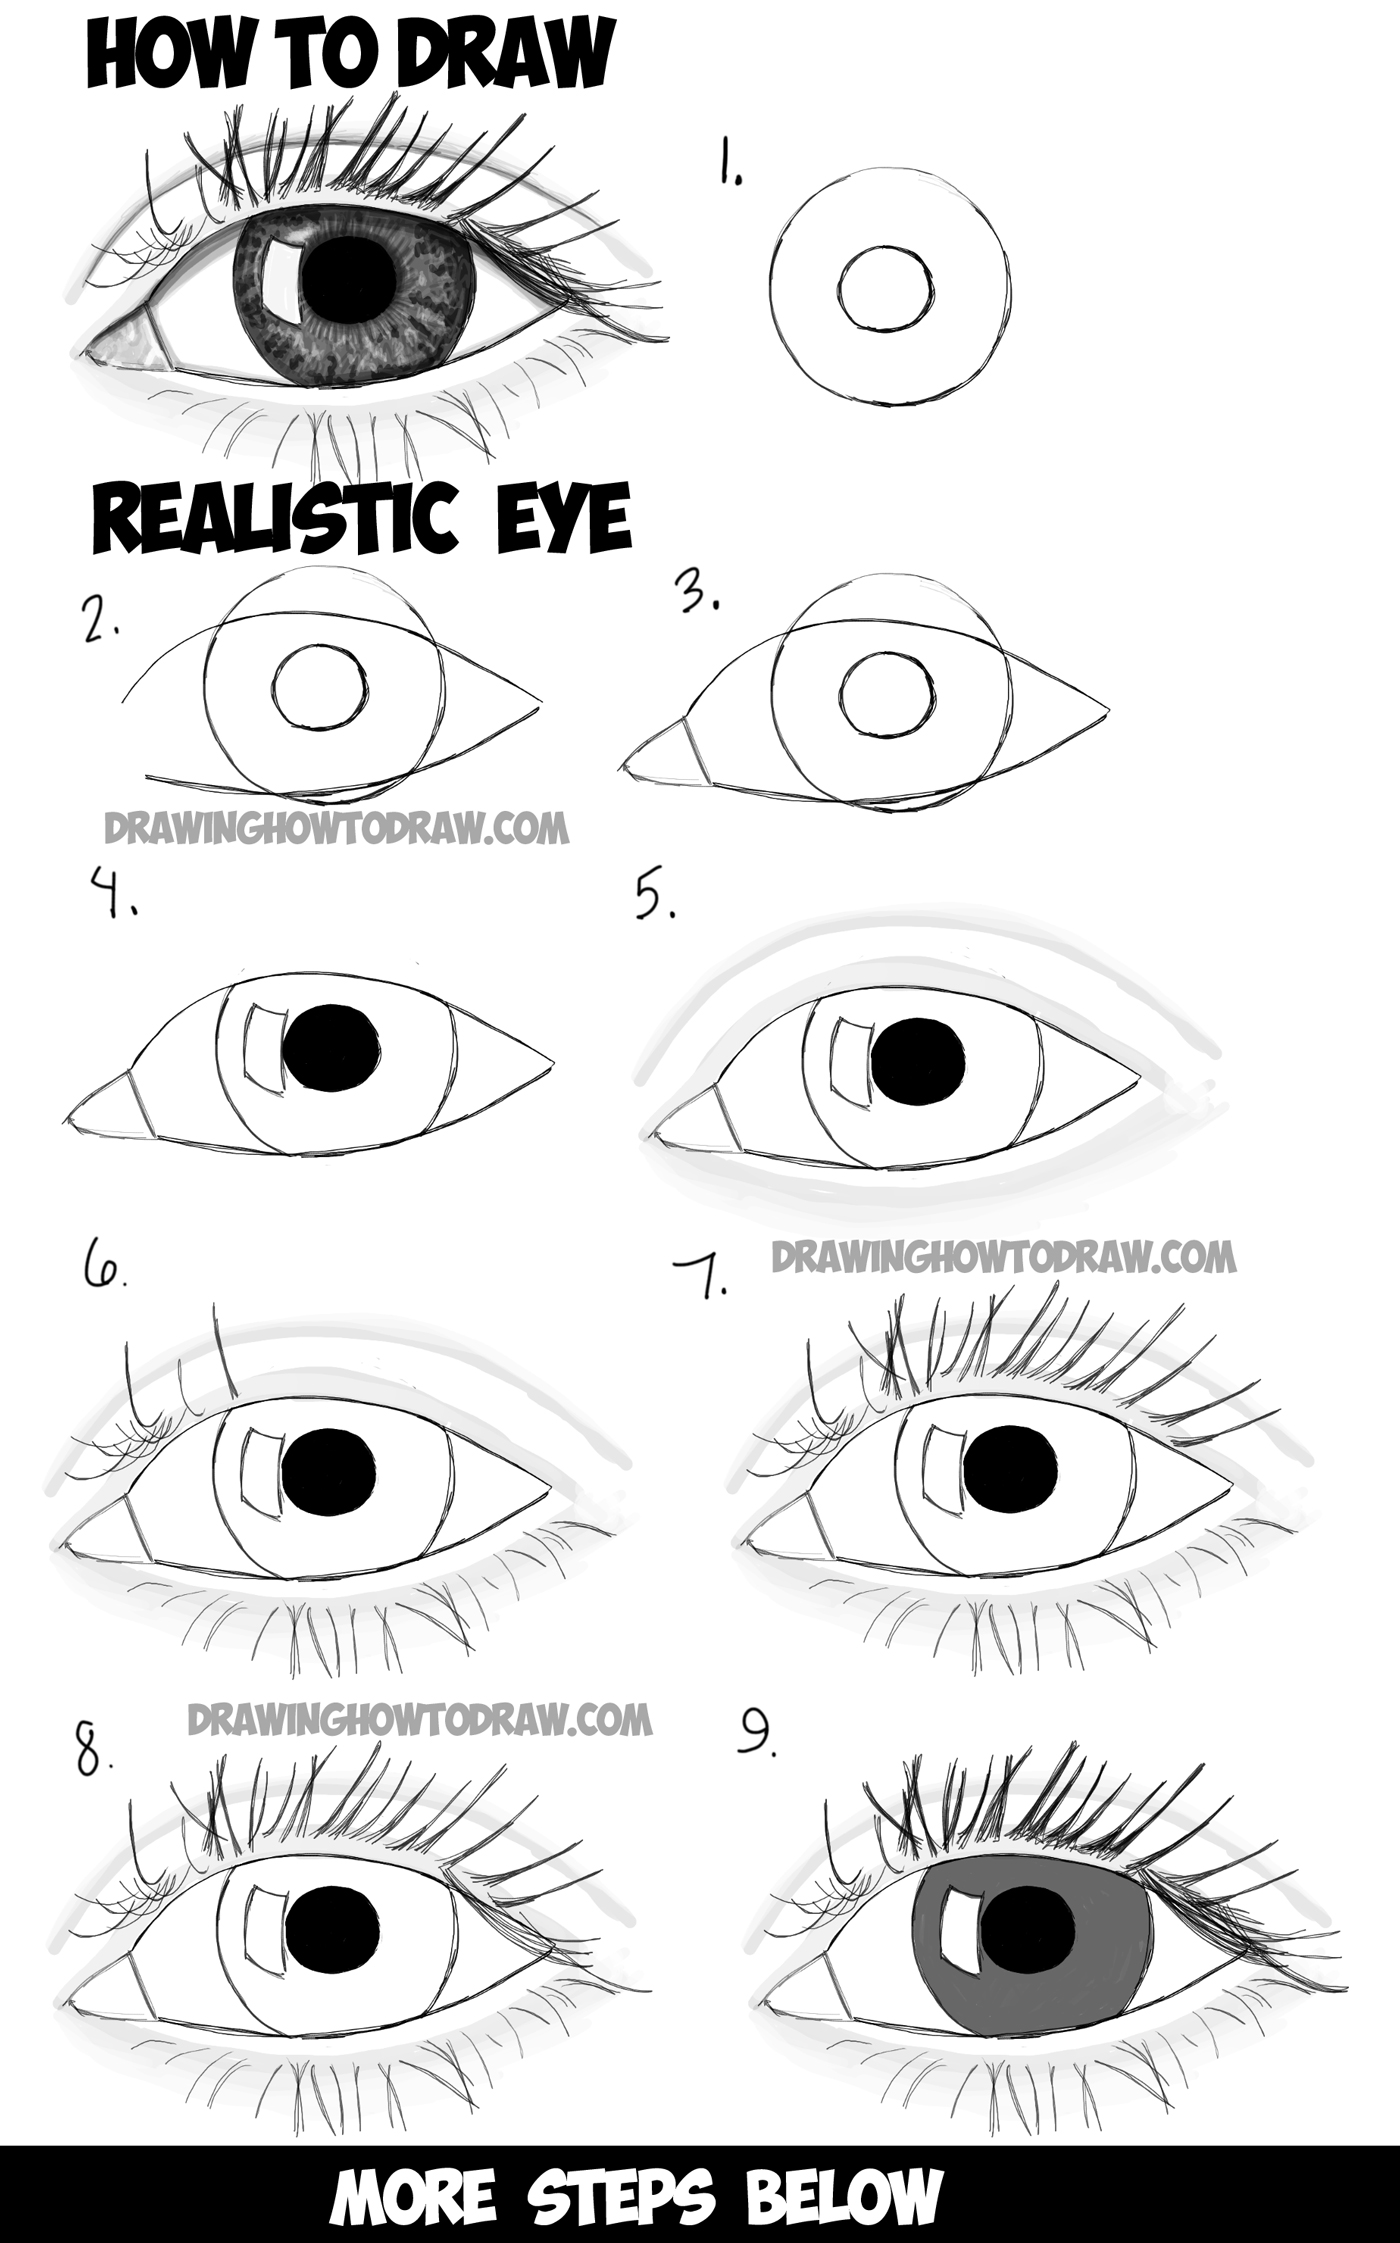 how-to-draw-realistic-eyes-with-step-by-step-drawing-tutorial-in-easy